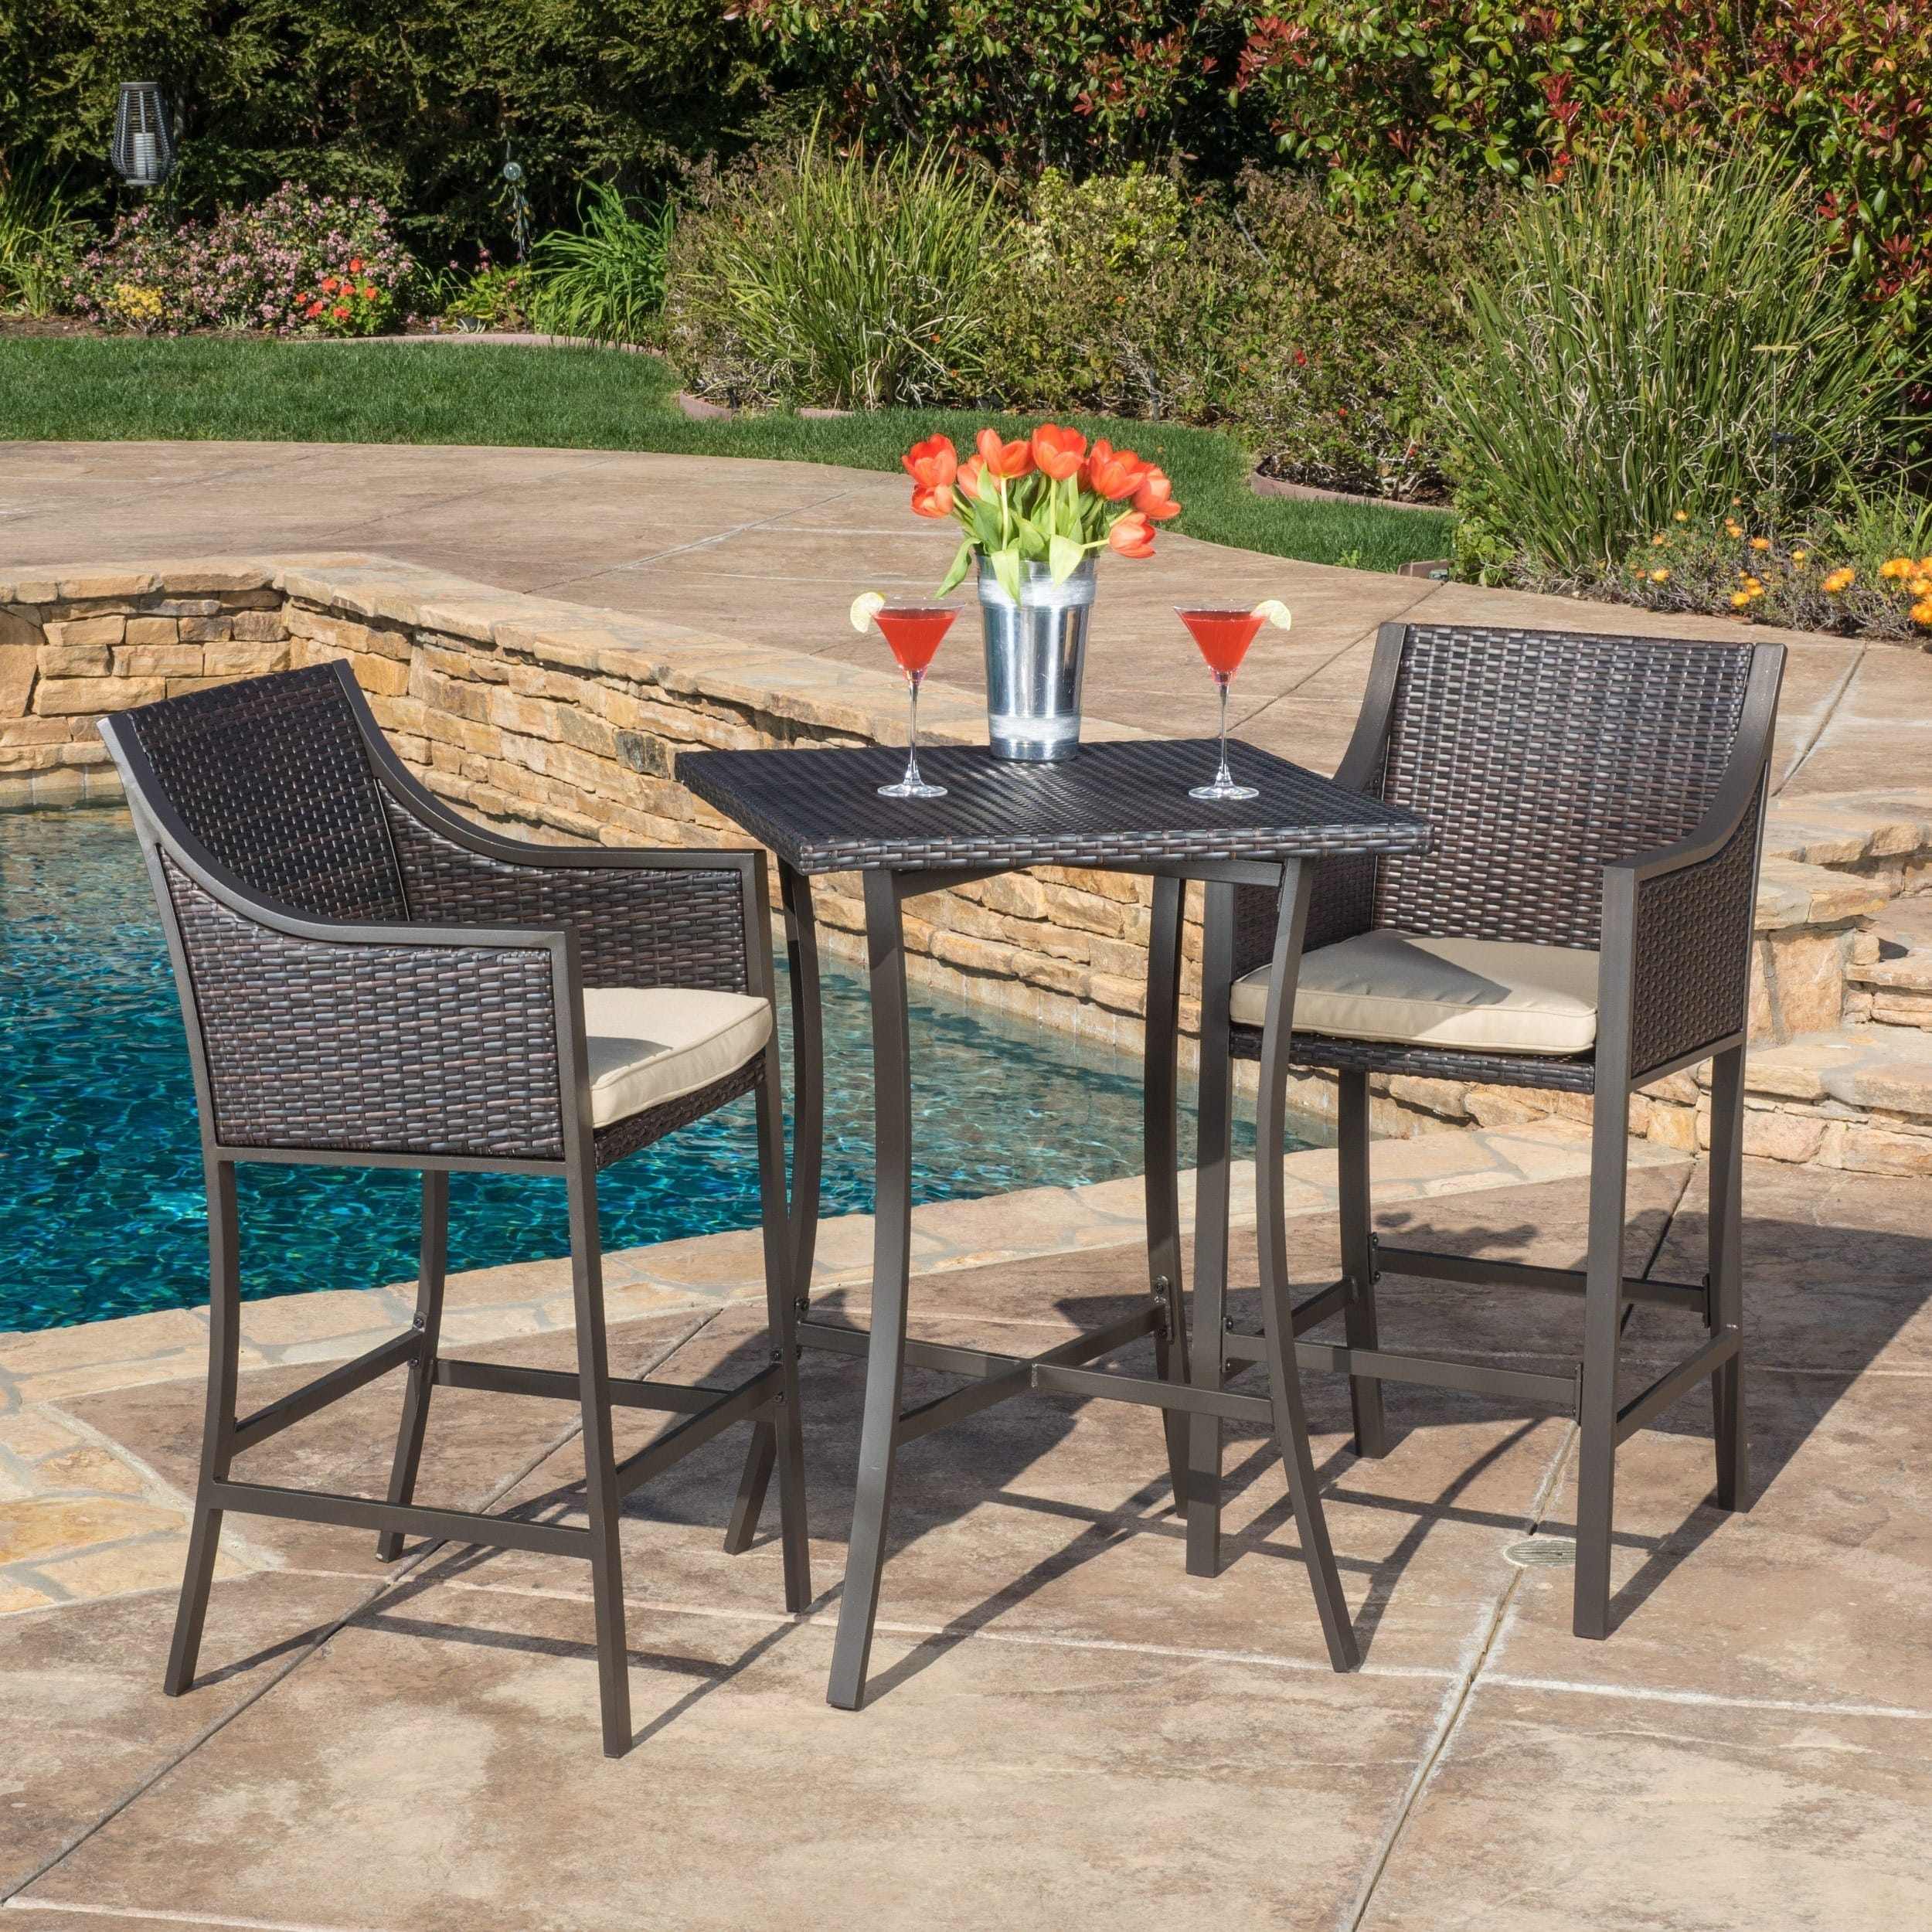 Riga Outdoor 3-piece Wicker Bistro Bar Set With Cushion By Christopher Knight Home